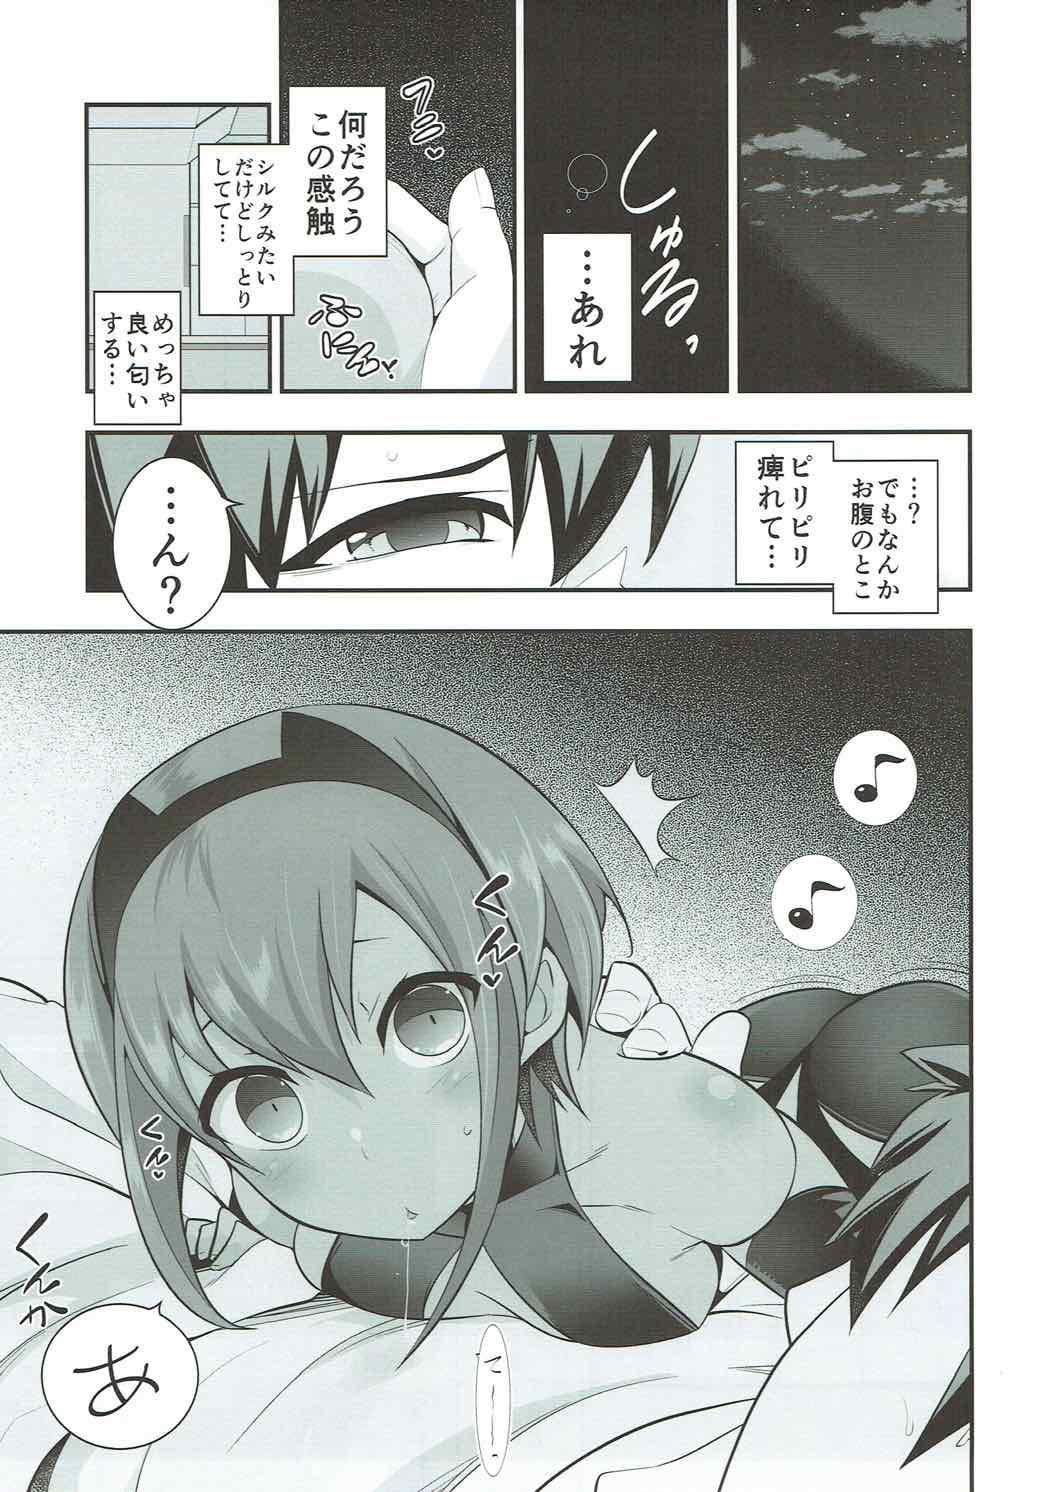 Bed Natsuita - Fate grand order Guys - Page 4